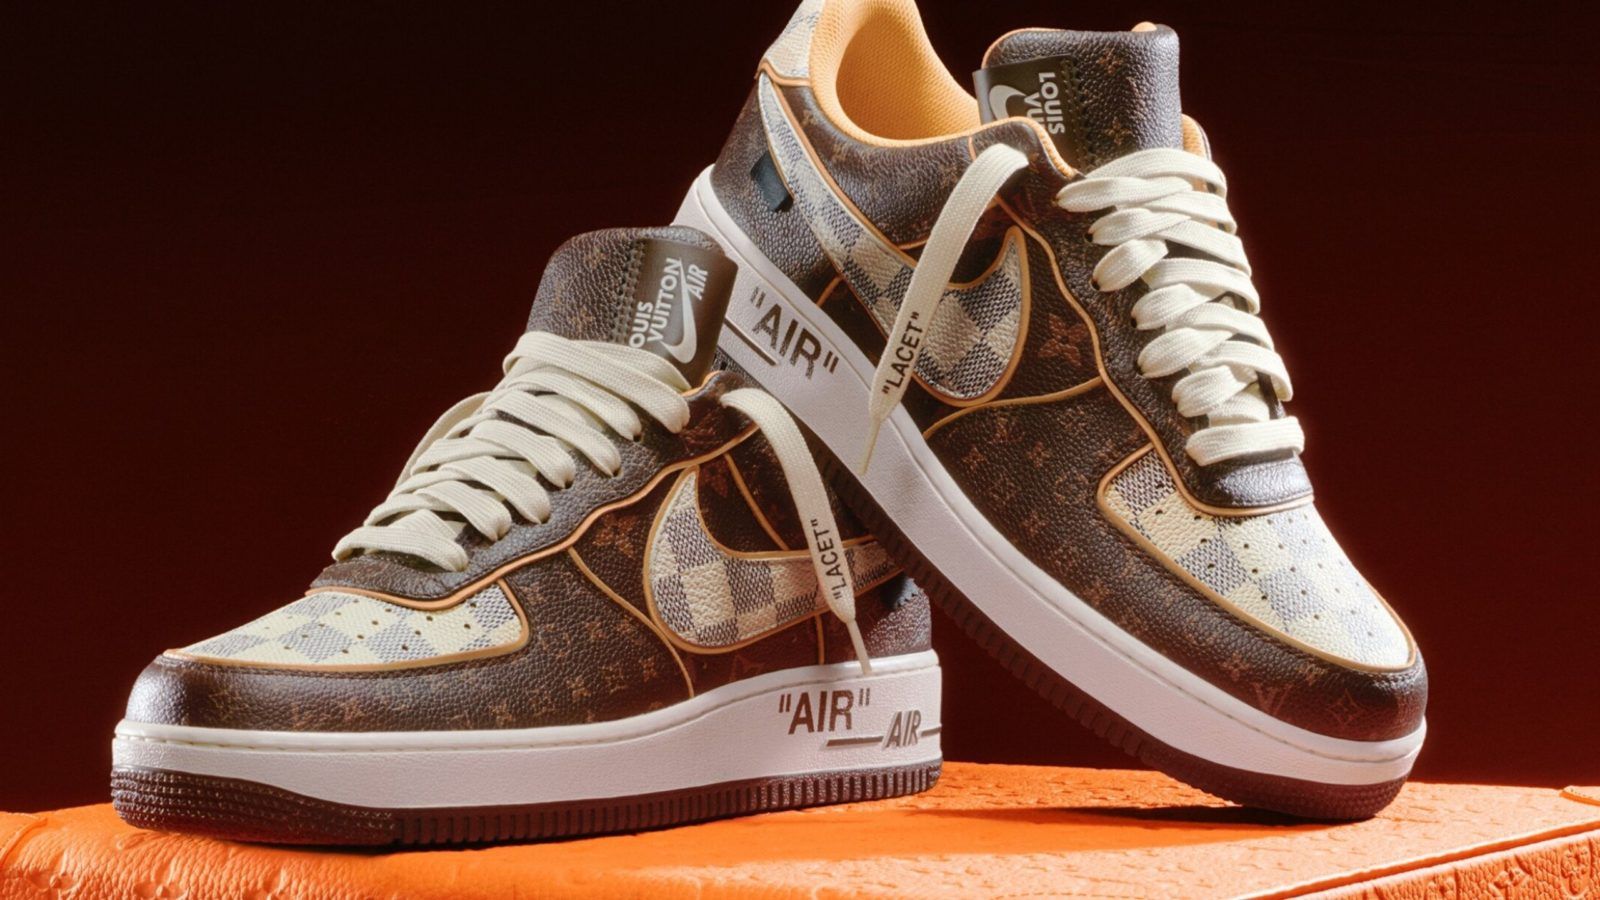 200 Louis Vuitton x Nike AF1 sneakers are headed to auction at Sotheby’s